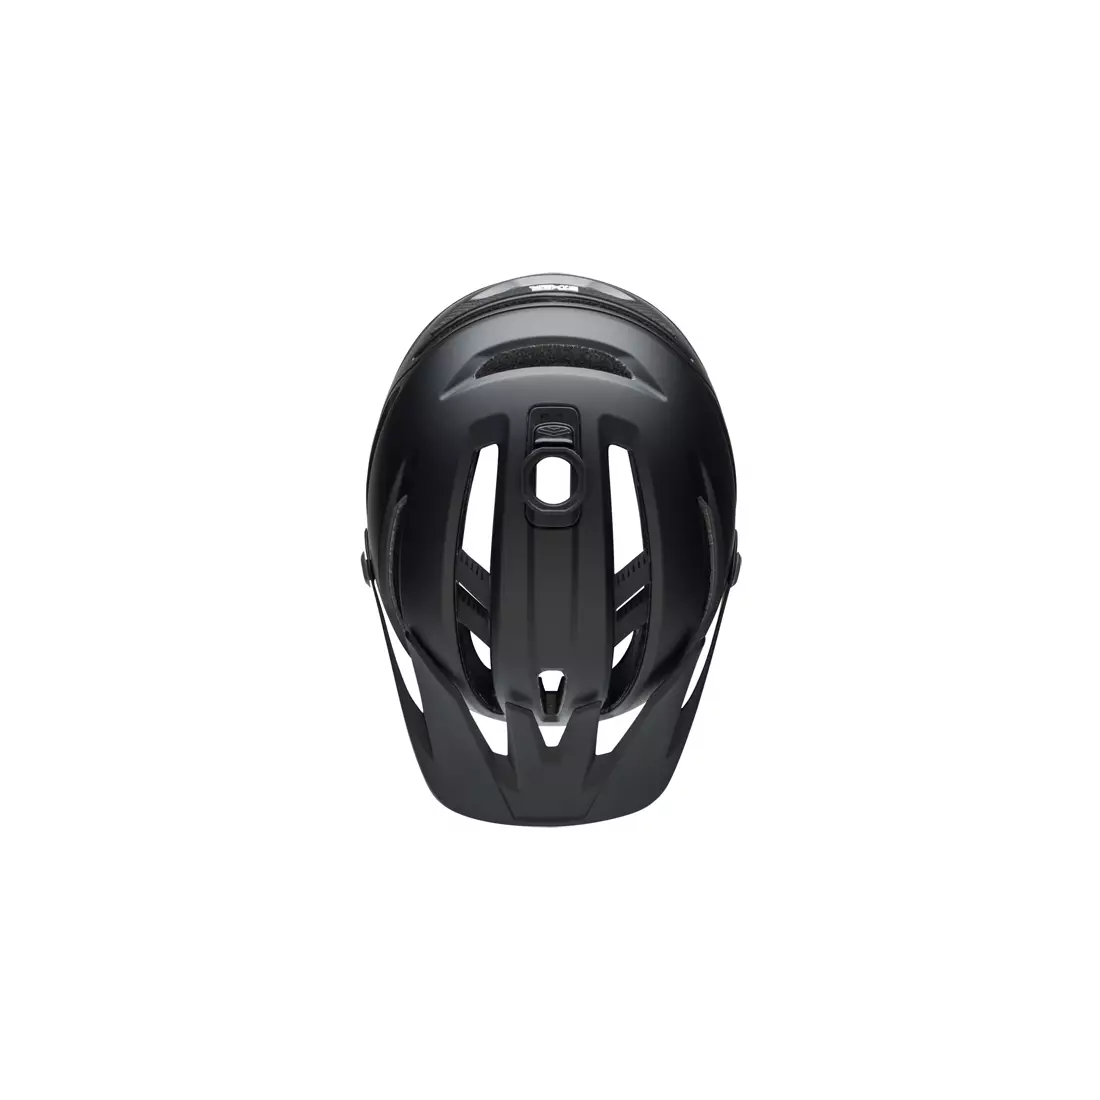 BELL kask rowerowy mtb SIXER INTEGRATED MIPS, matte black 